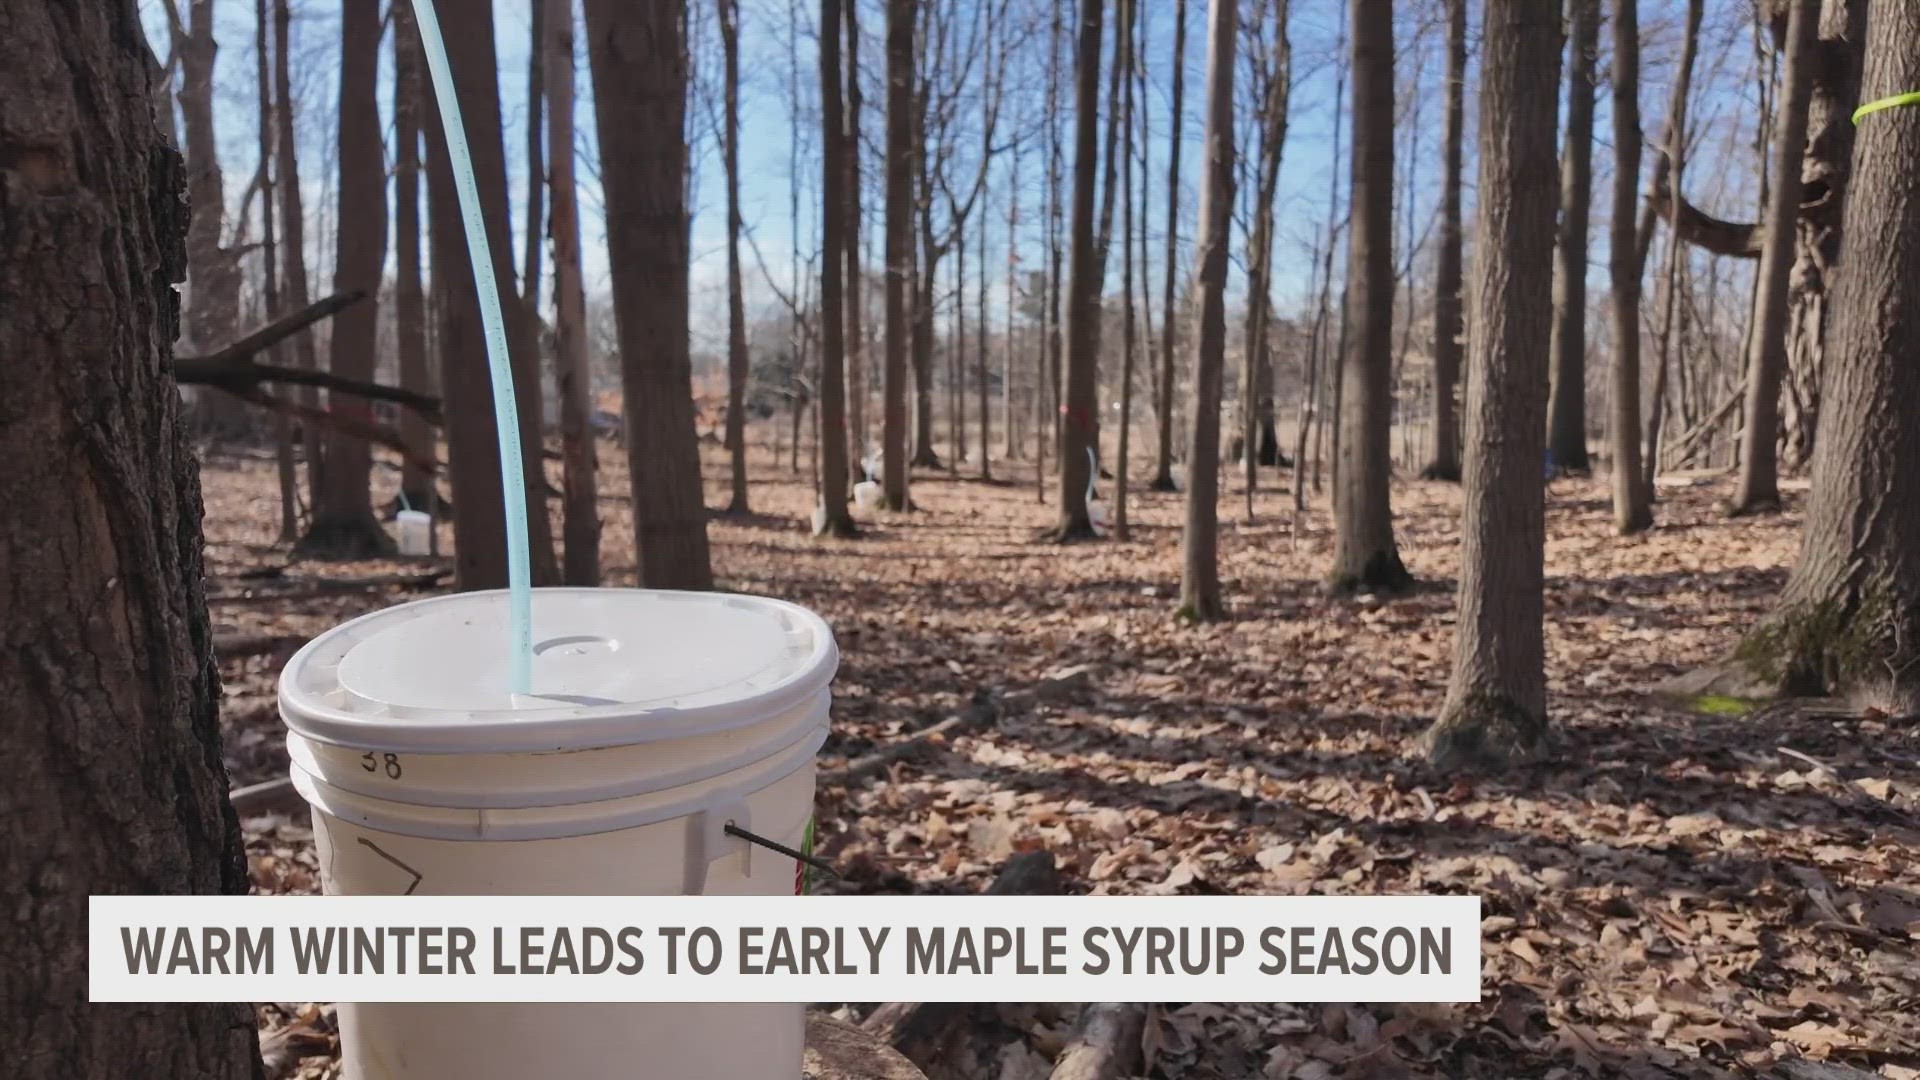 Blandford Nature Center is seeing an earlier shift in the timing of maple syrup production in recent years.